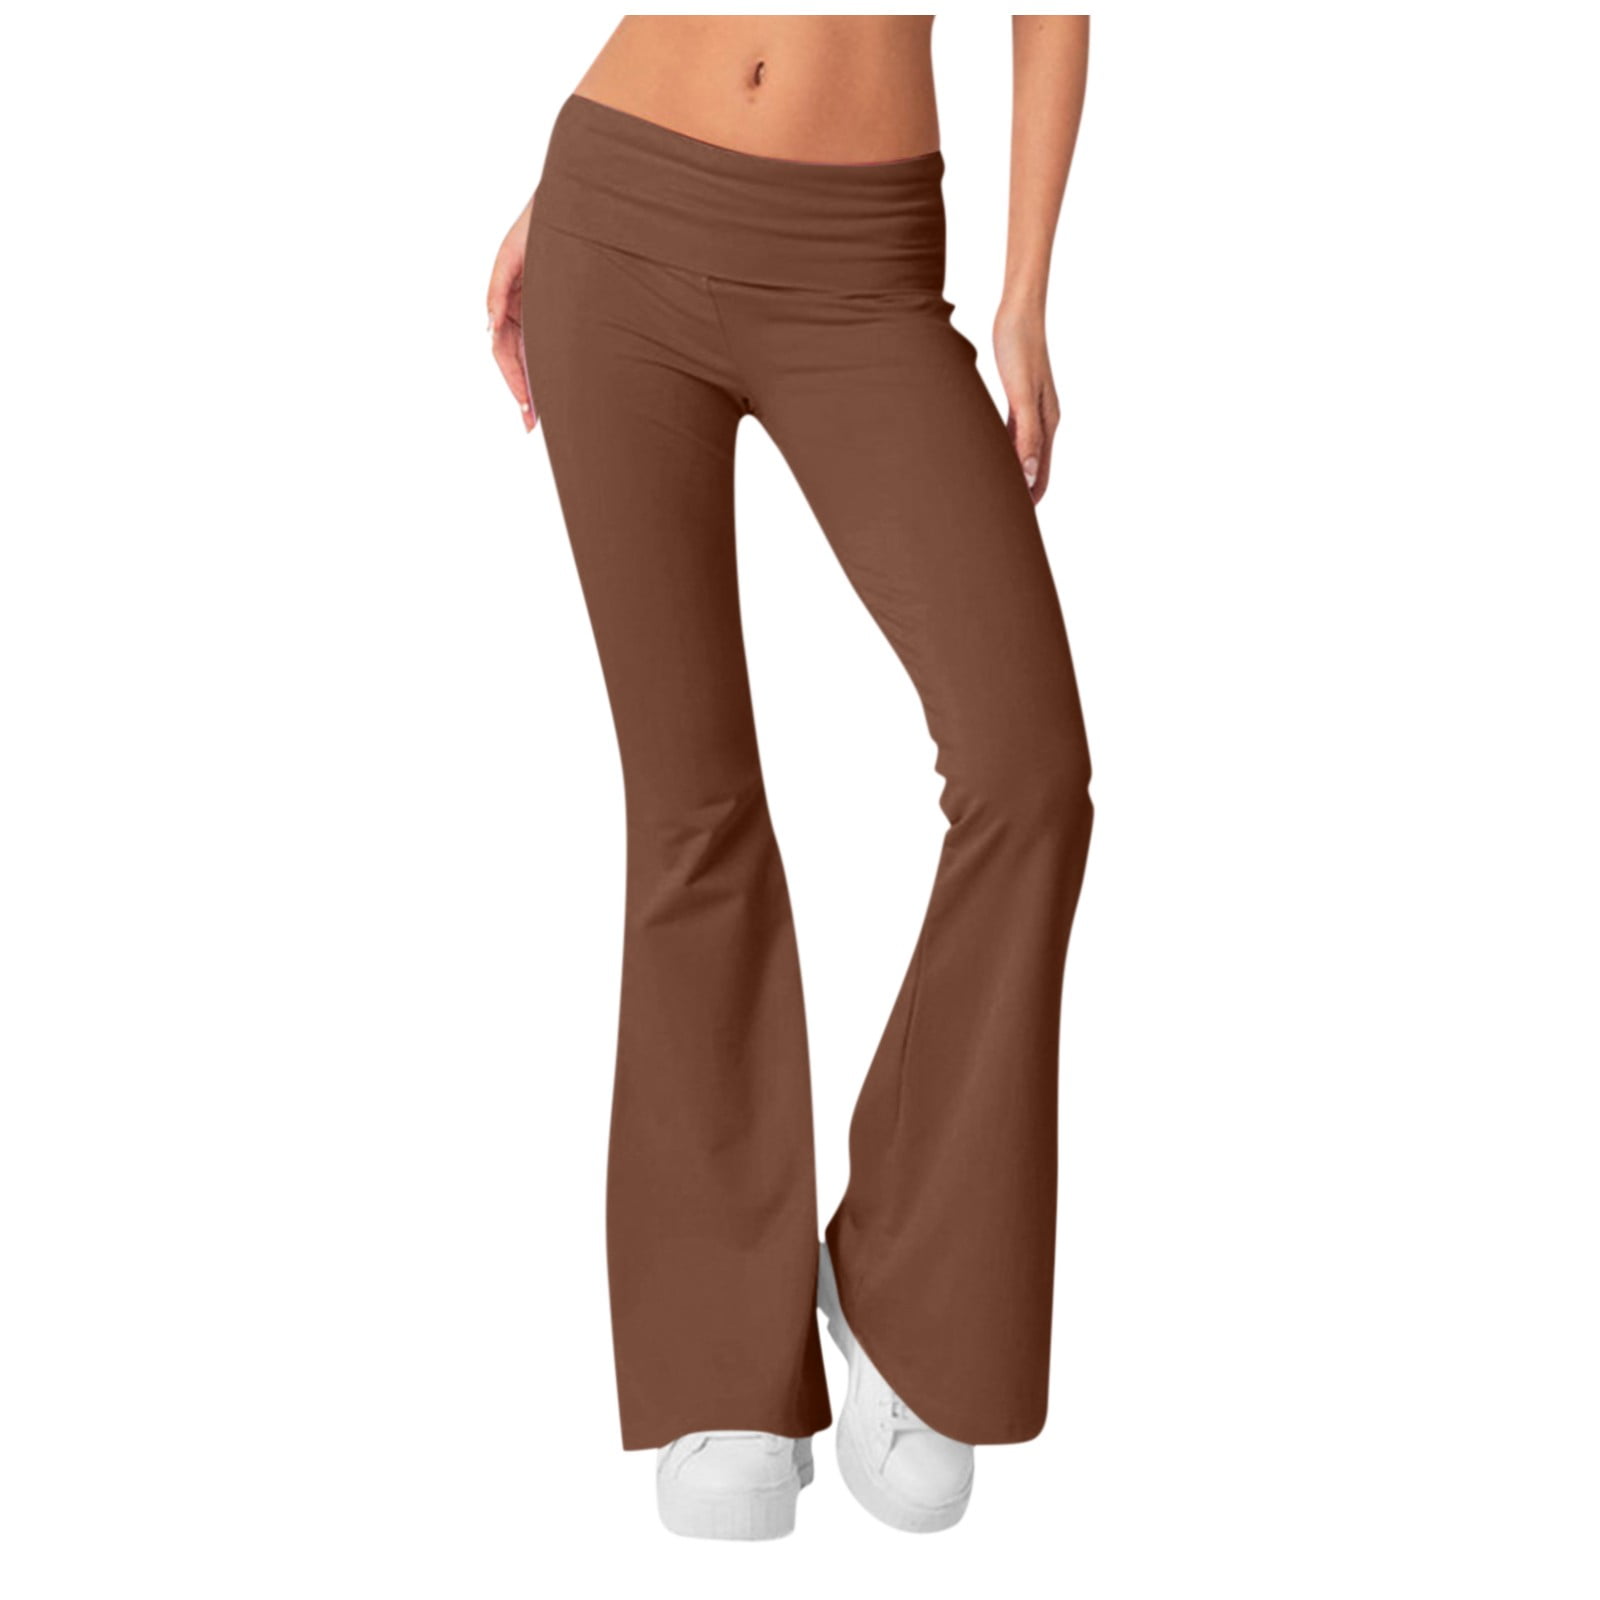 Women's 2000s Fold Over Waistband, Y2K Bootcut Cotton-blend Yoga Pants,  Brown, Jade White -  Canada